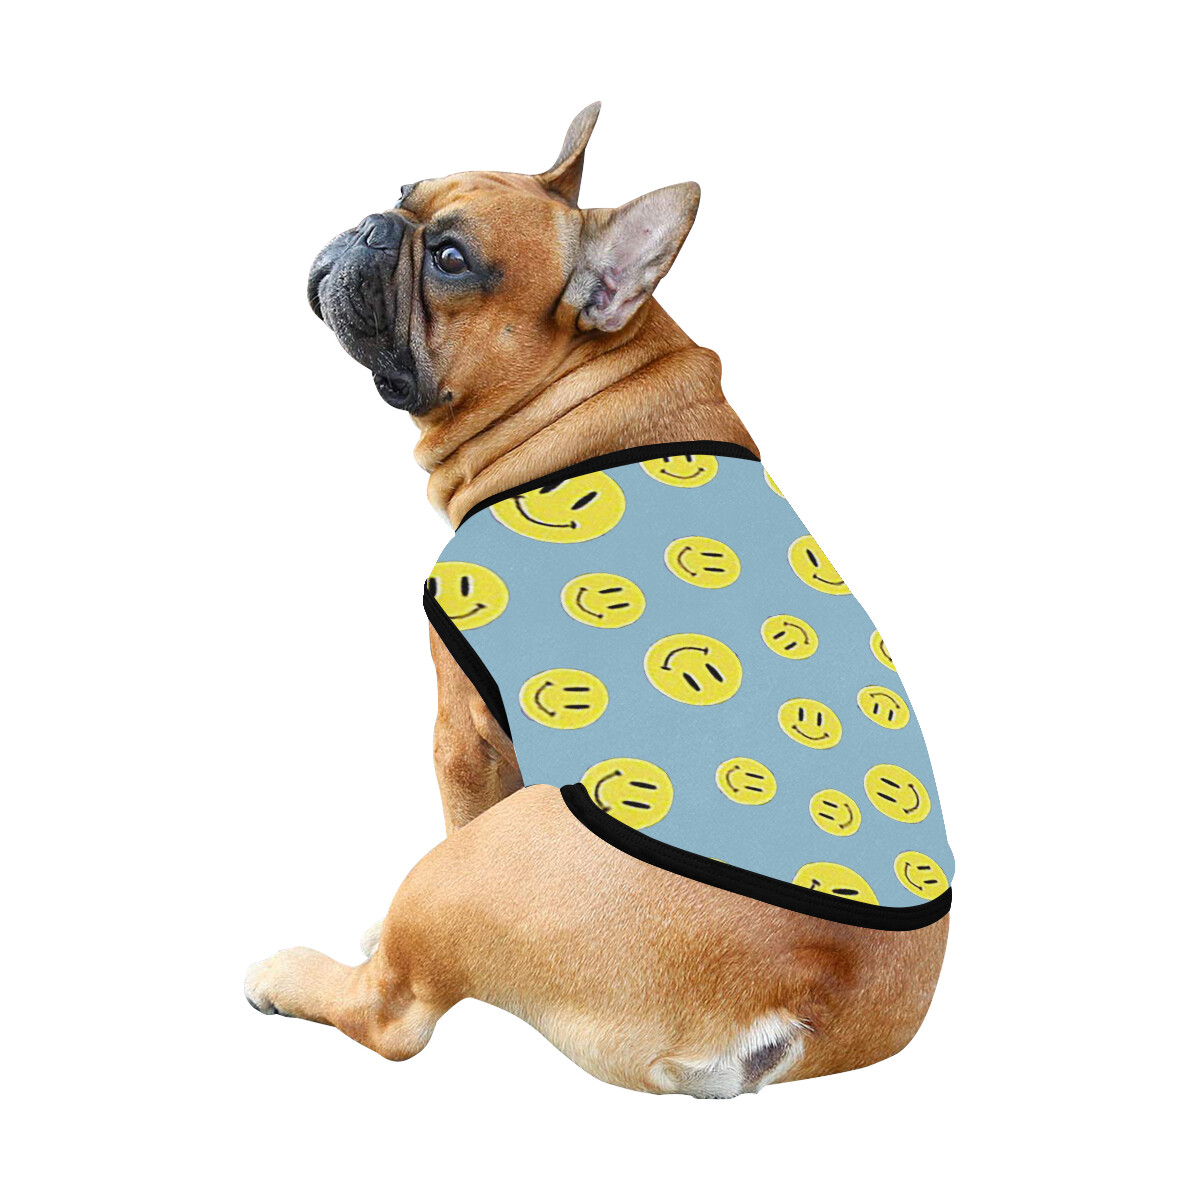 🐕 Happy faces Dog Tank Top, Dog shirt, Dog clothes, Gifts, front back print, 7 sizes XS to 3XL, dog t-shirt, dog t-shirt, dog gift, regent st blue